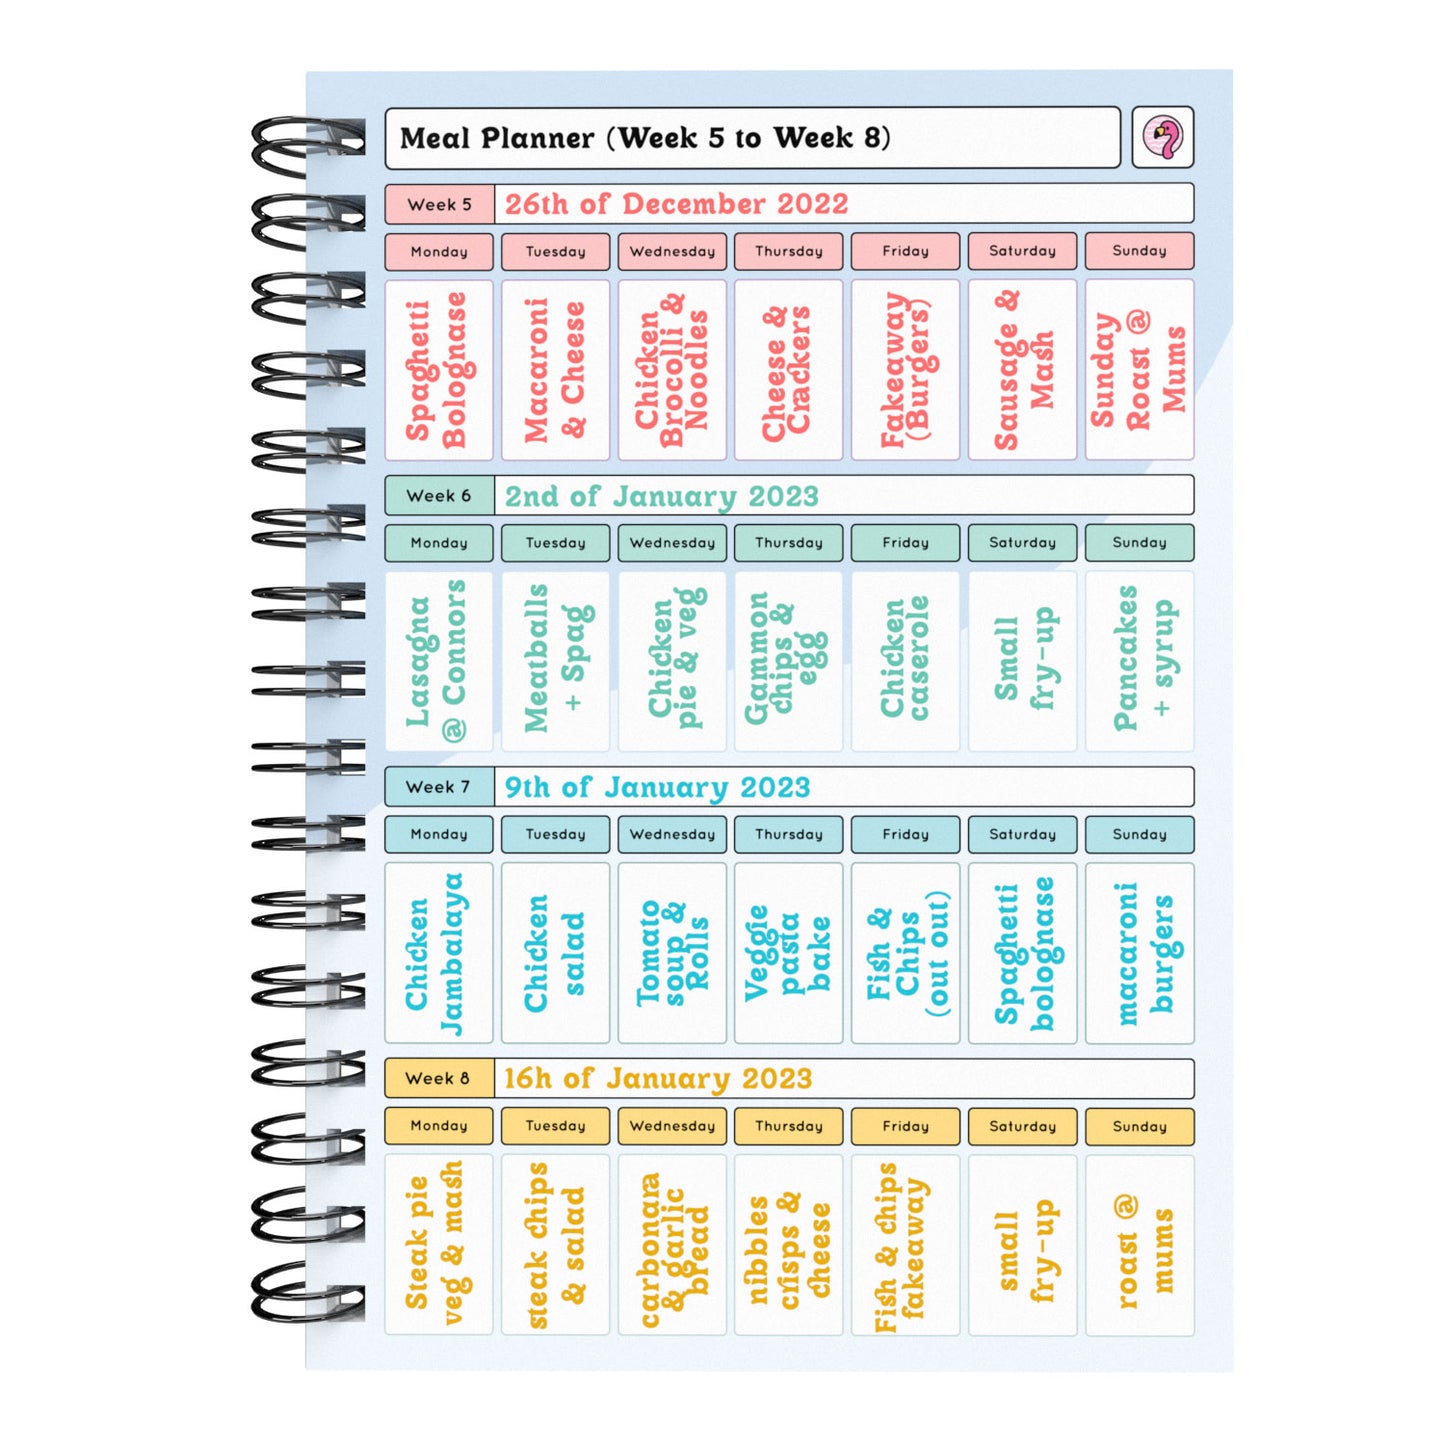 Food Diary - C24 - Calorie Counting